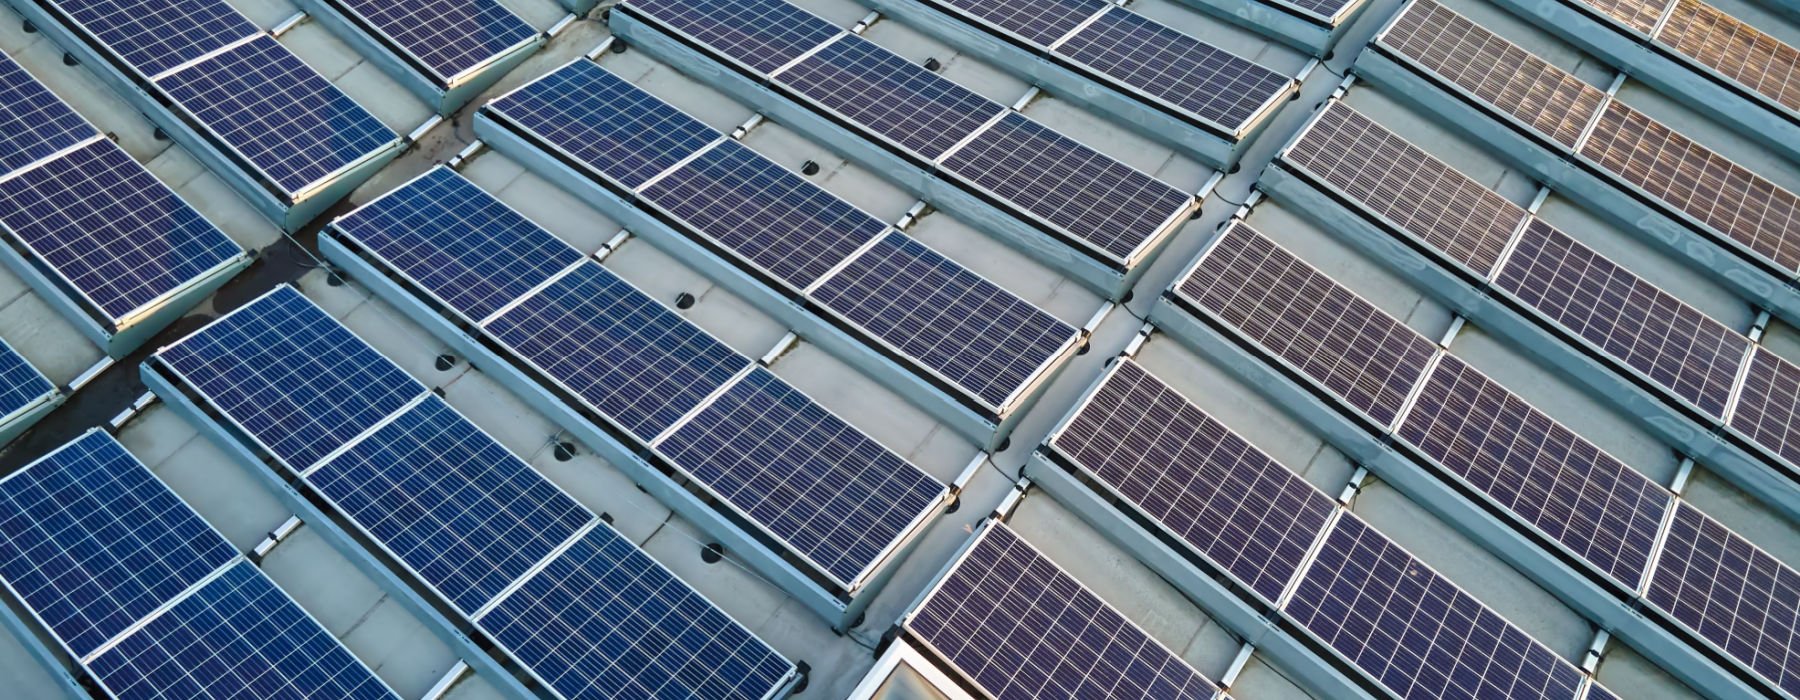 Top 3 Reasons to Install a Solar Photovoltaic (PV) System in 2023